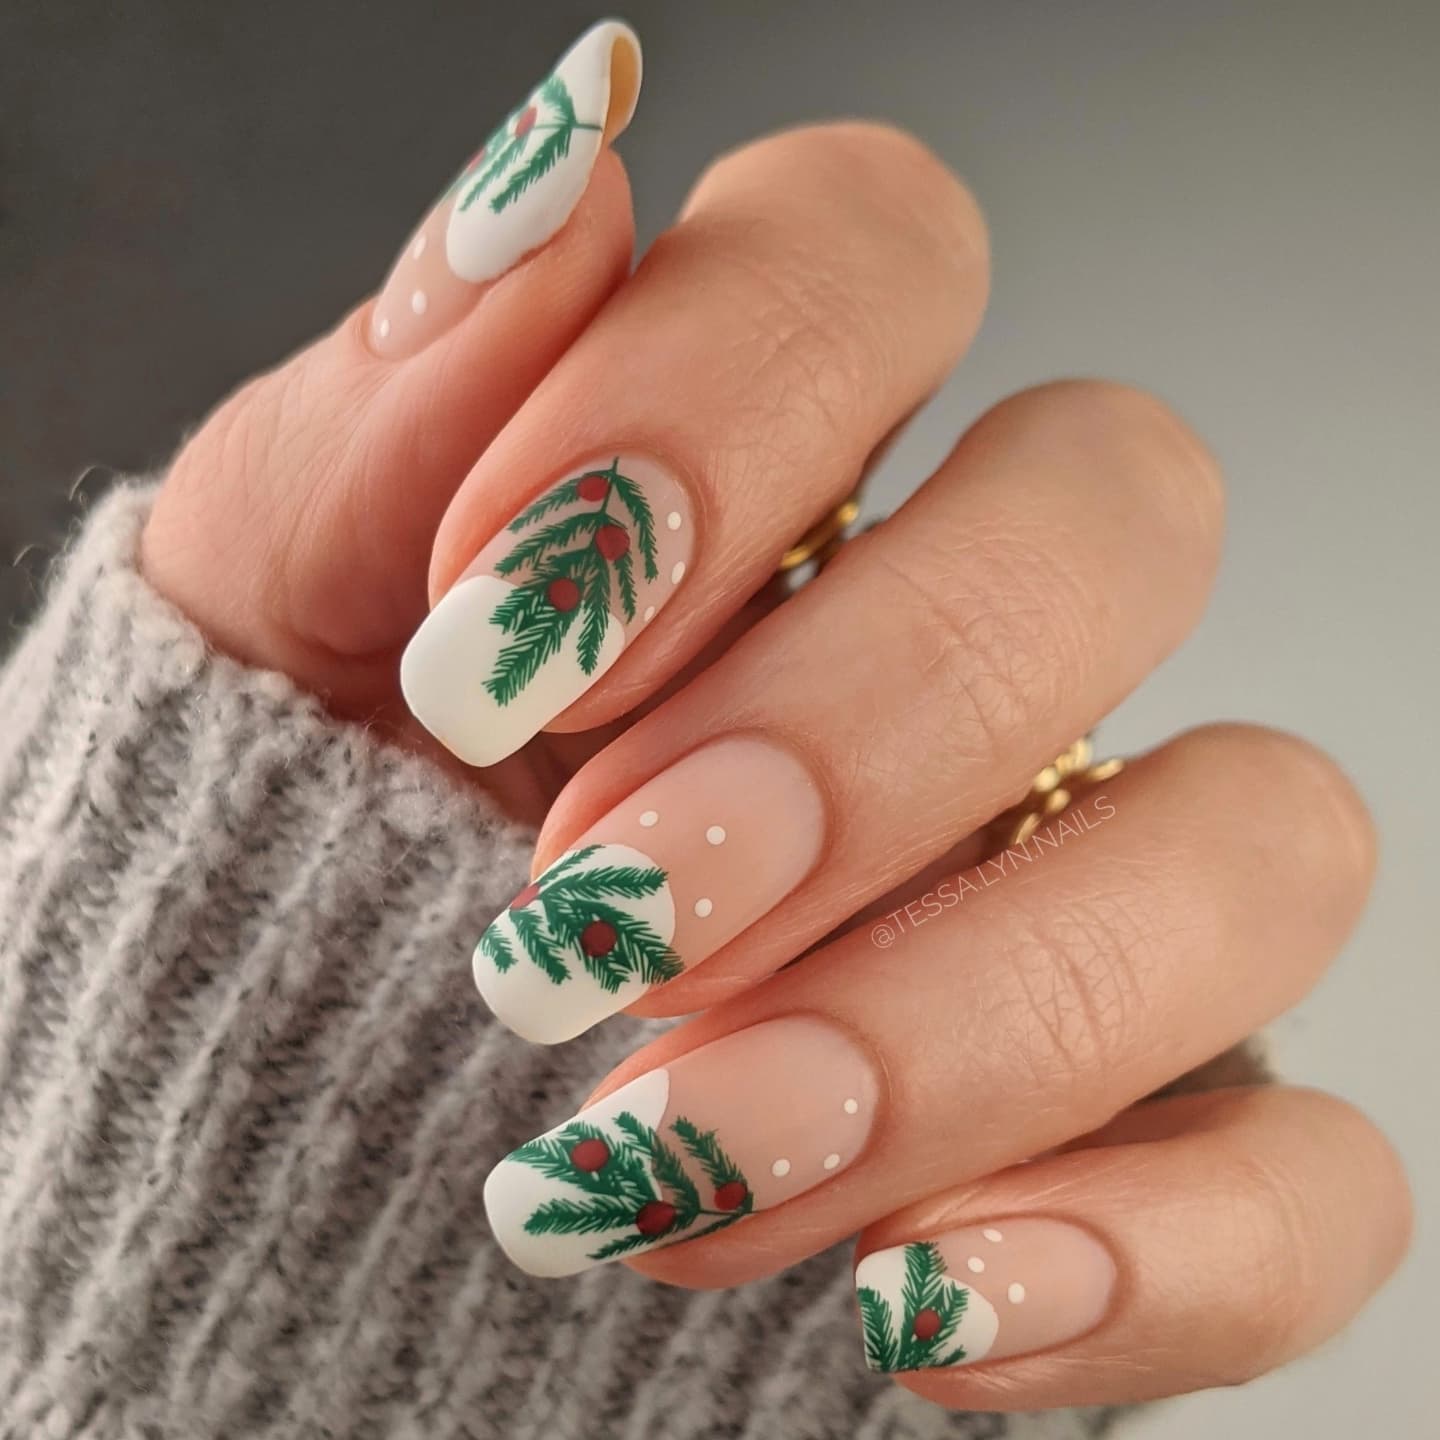 White Nails with Fir Tree Design